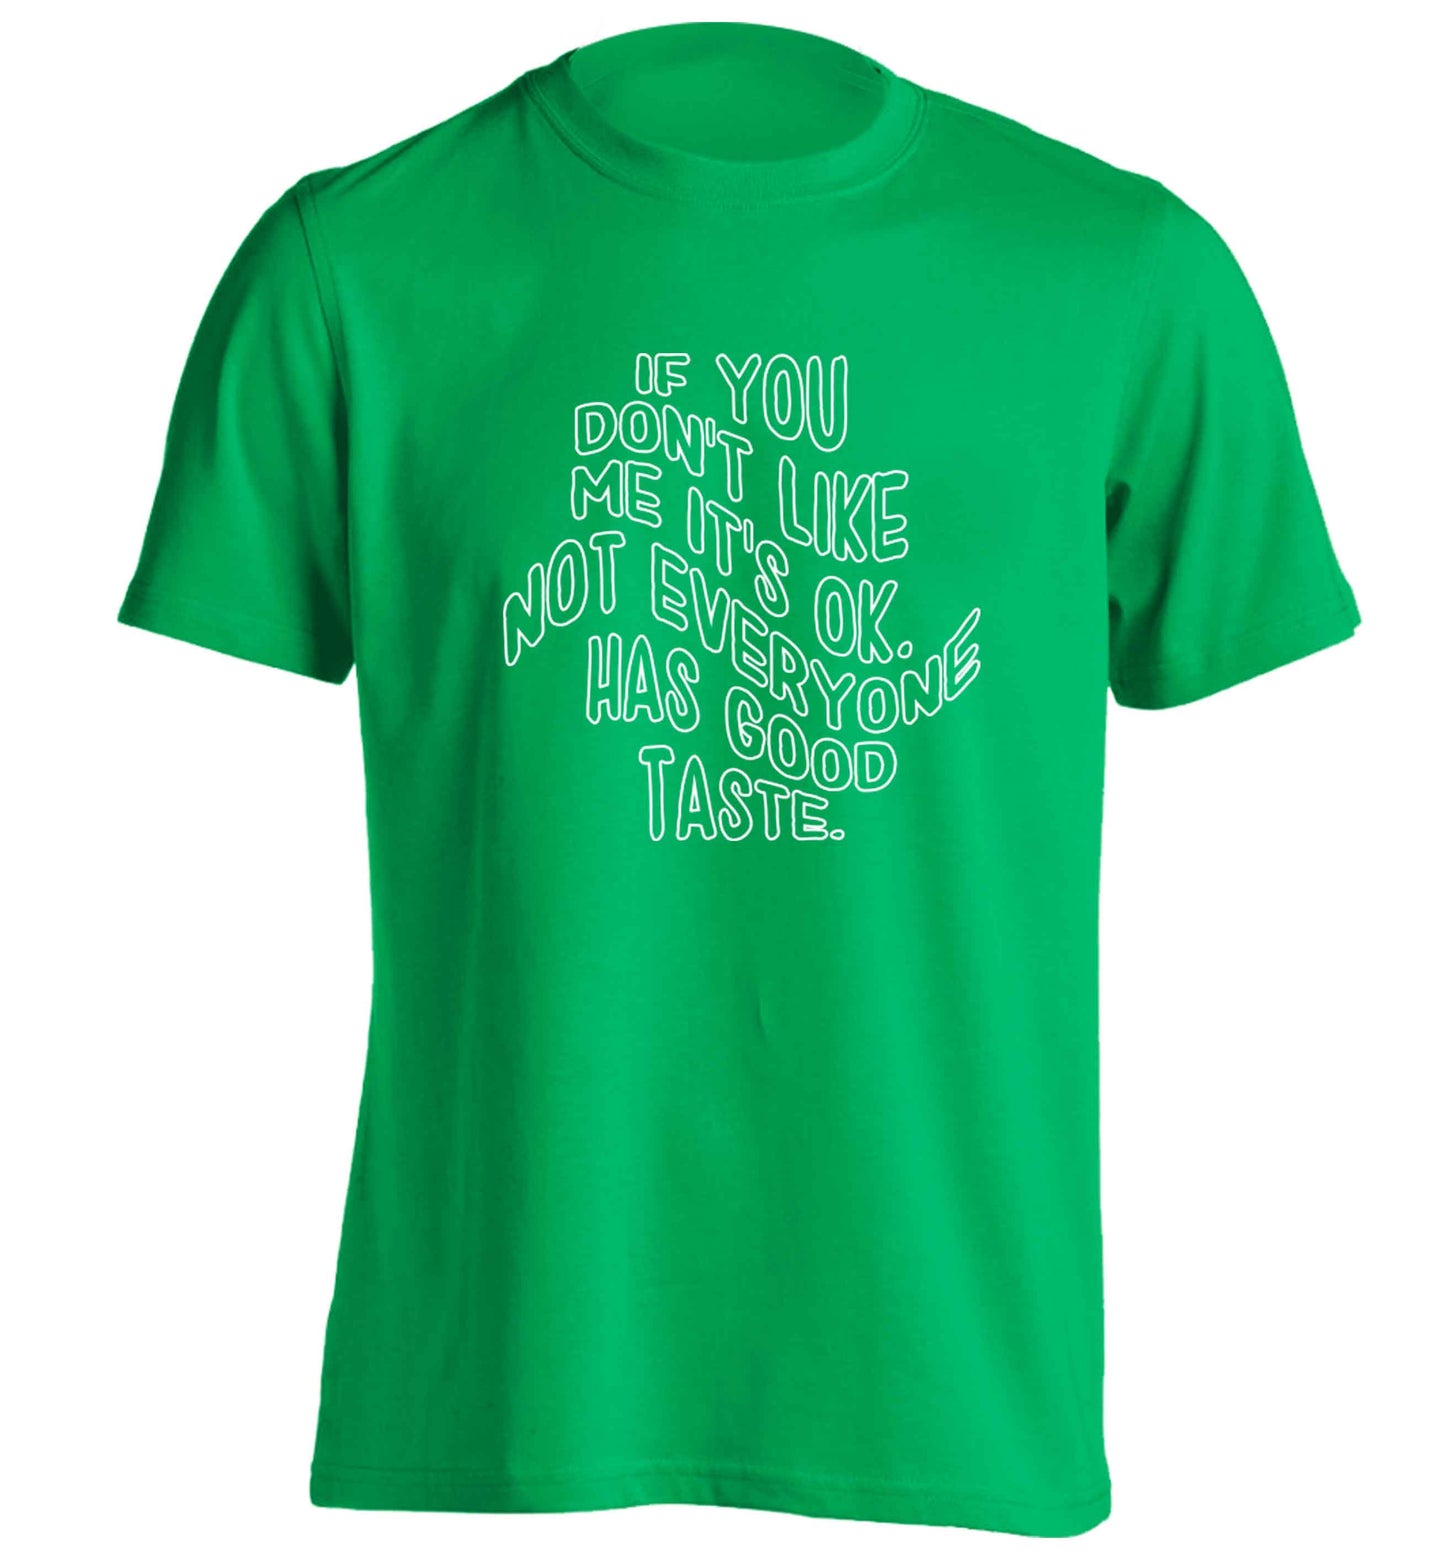 If you don't like me it's ok not everyone has good taste adults unisex green Tshirt 2XL